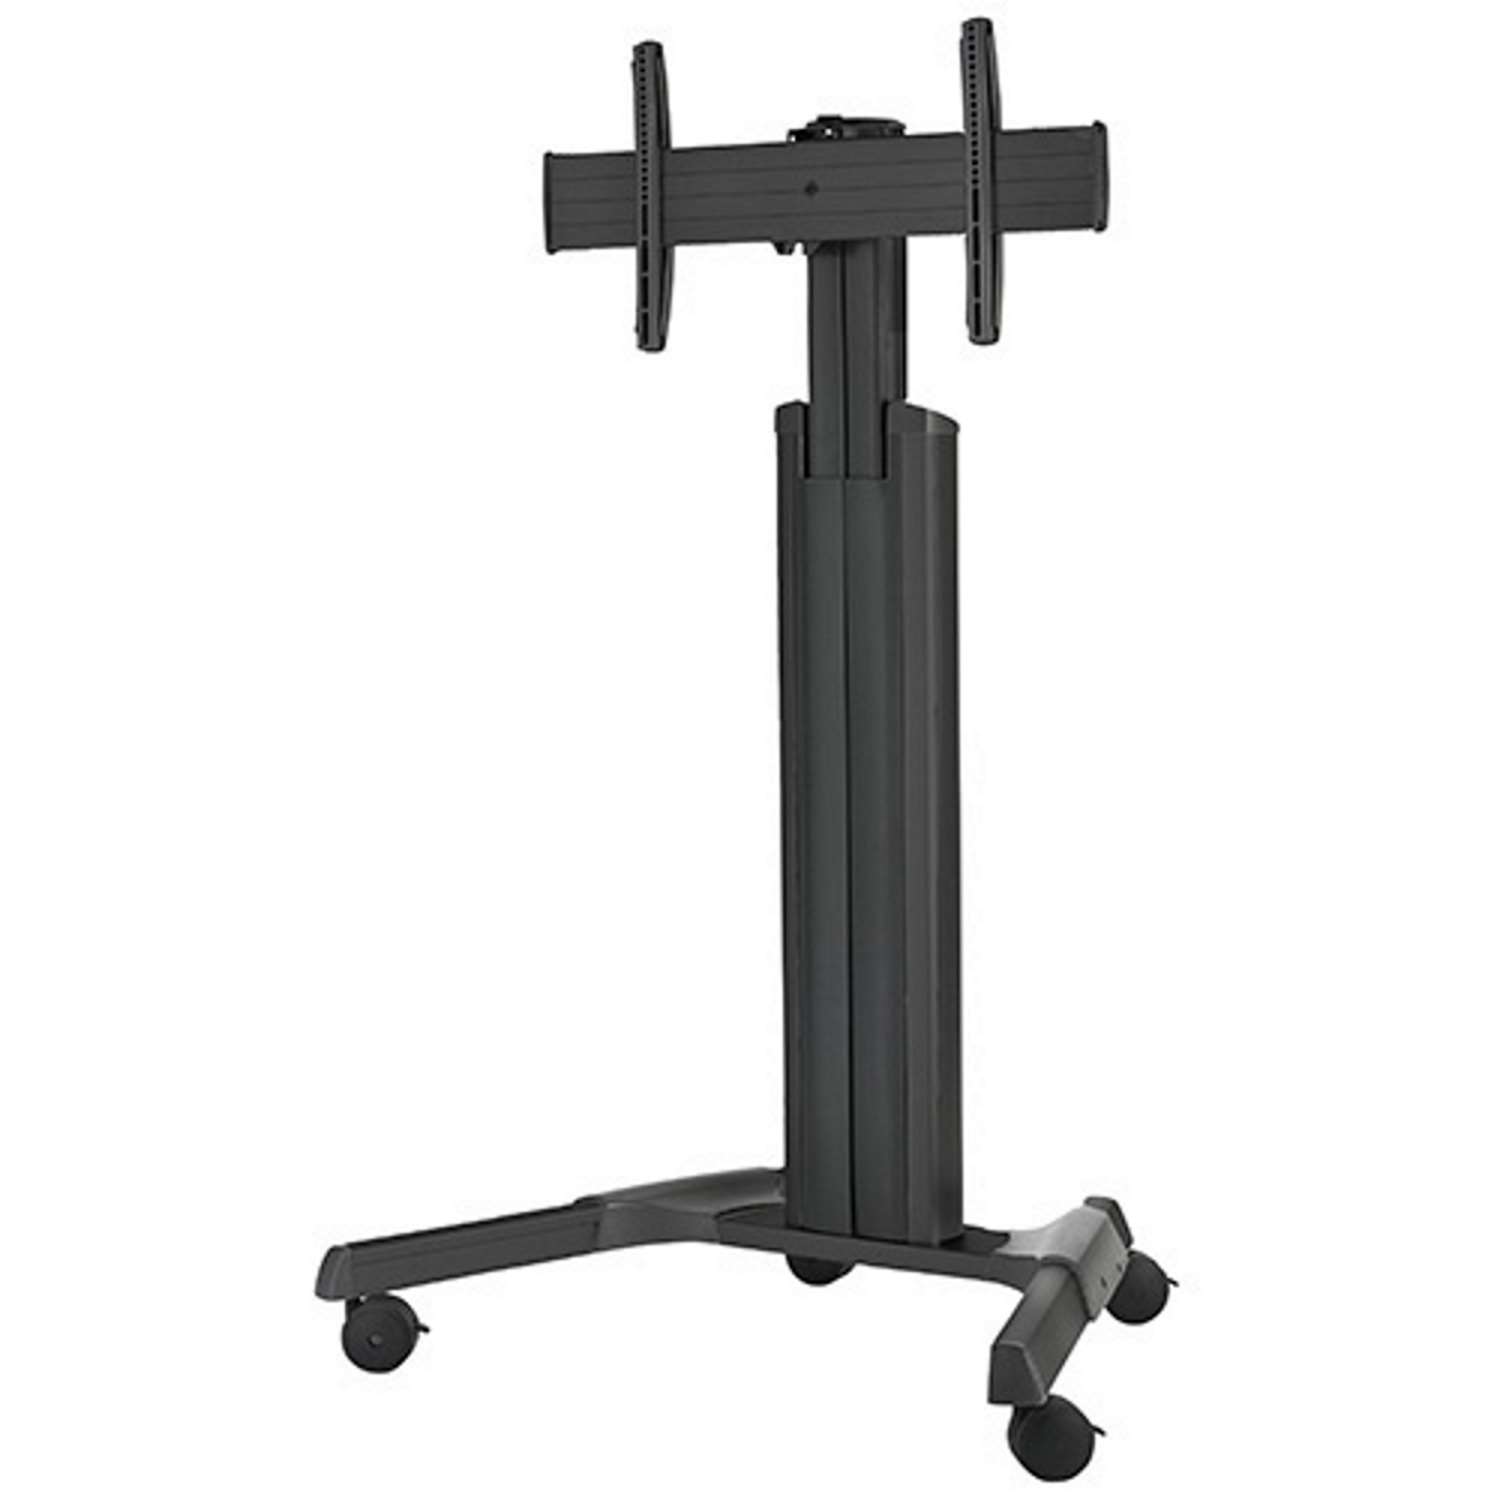 Display roll stand LPAU for 40-80 inch